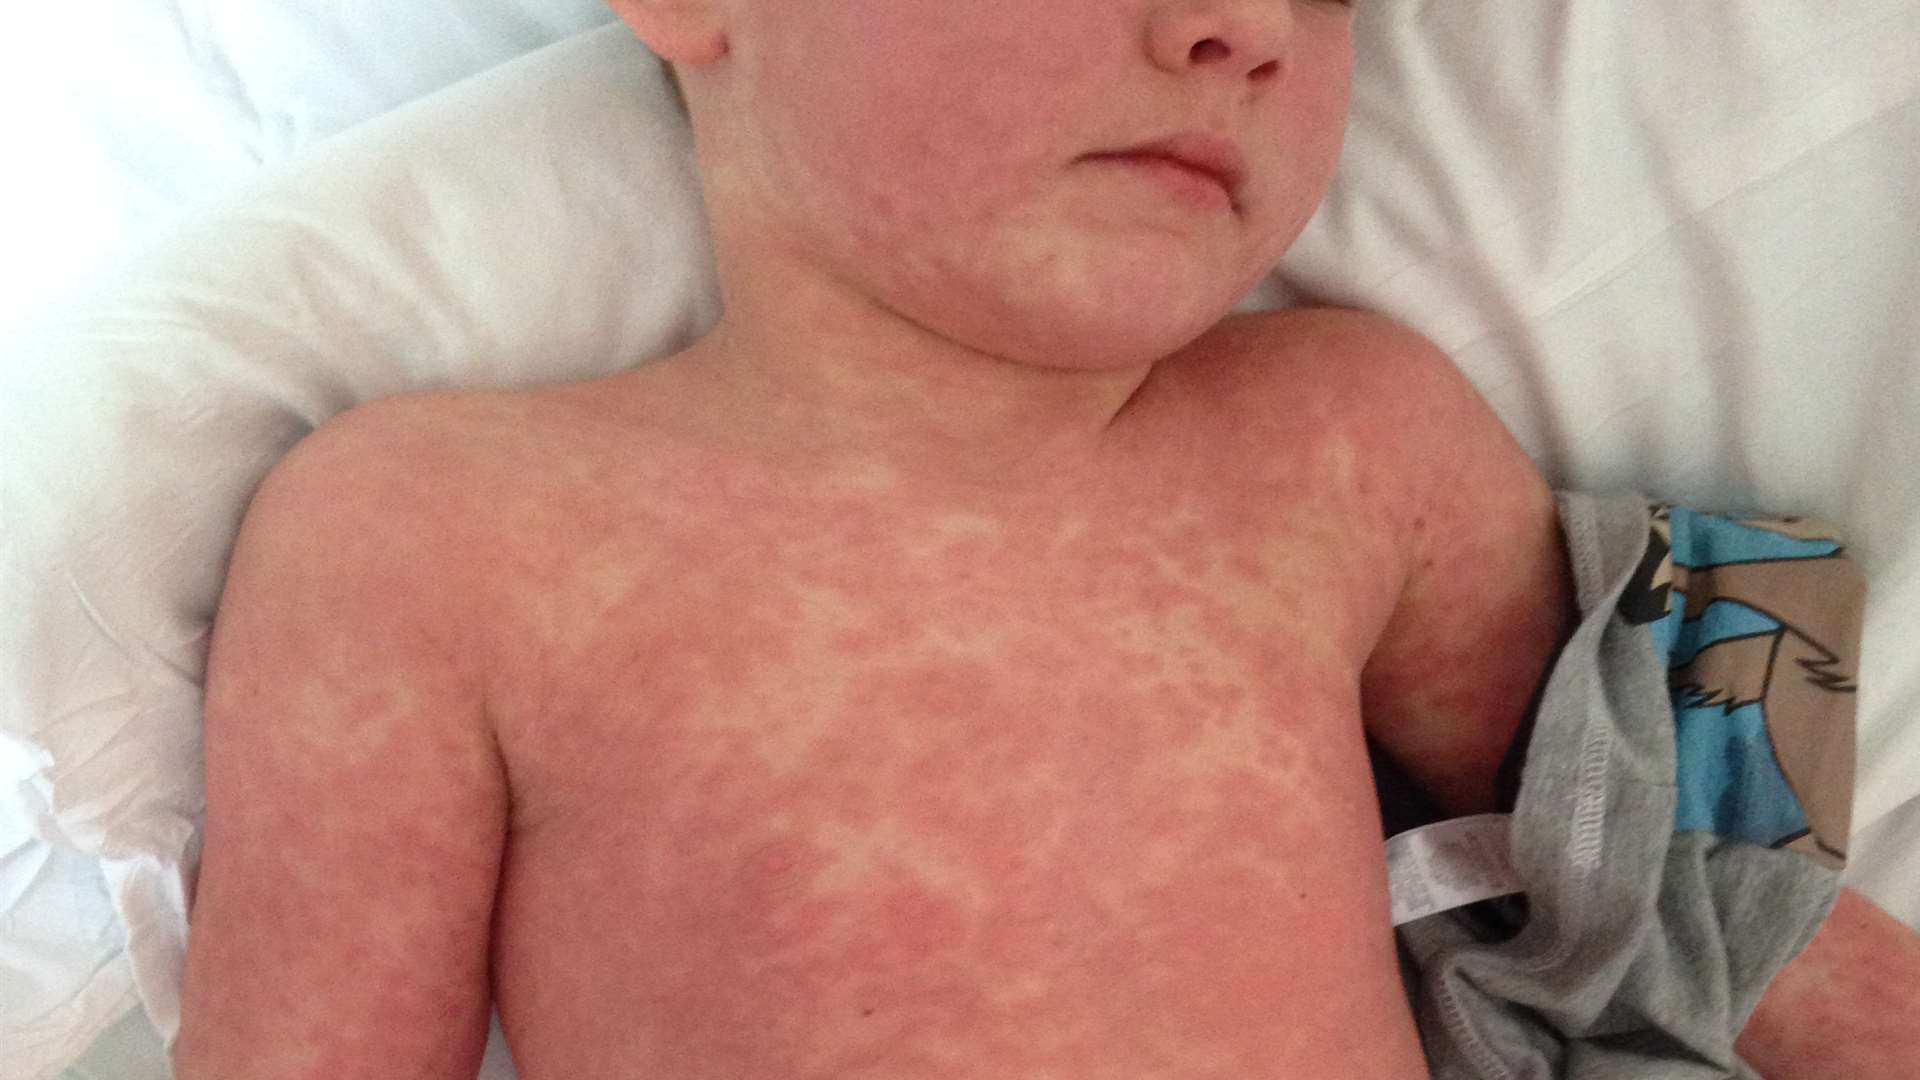 The mystery rash which left George Pemble, eight, in agony